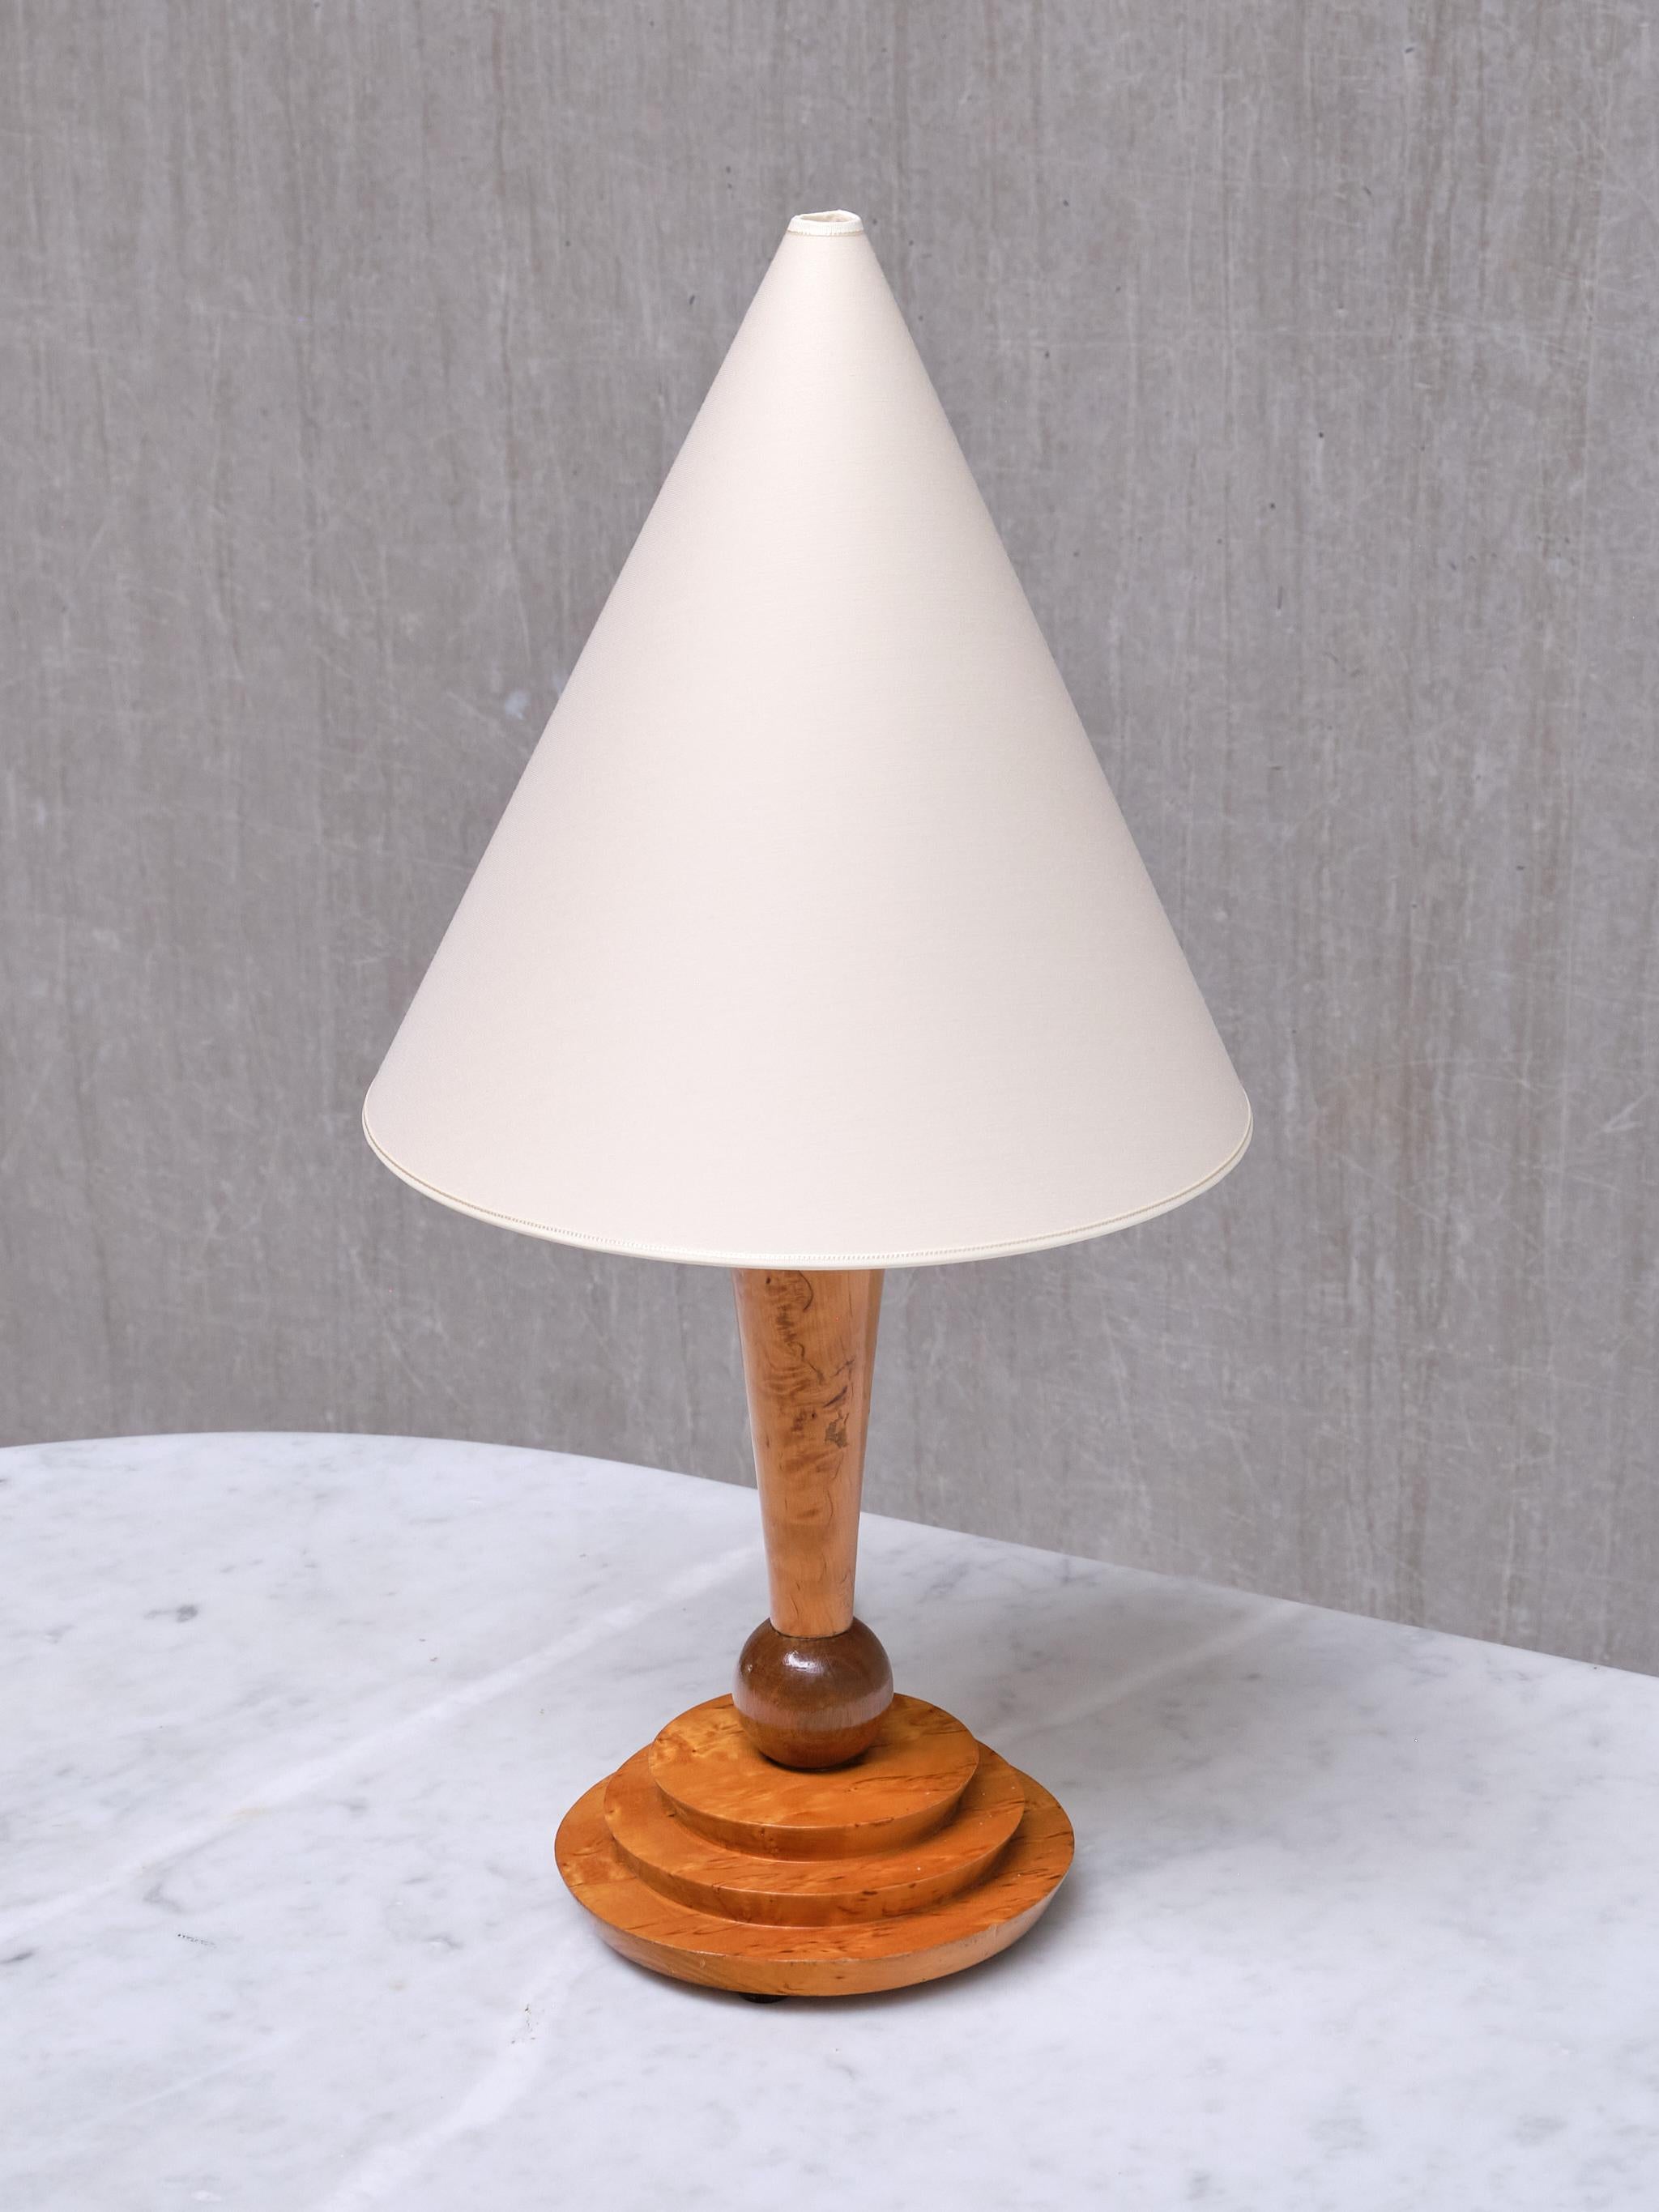 Mid-20th Century Art Deco Table Lamp in Birdseye Maple with Ivory Colored Shade, Austria, 1930s For Sale